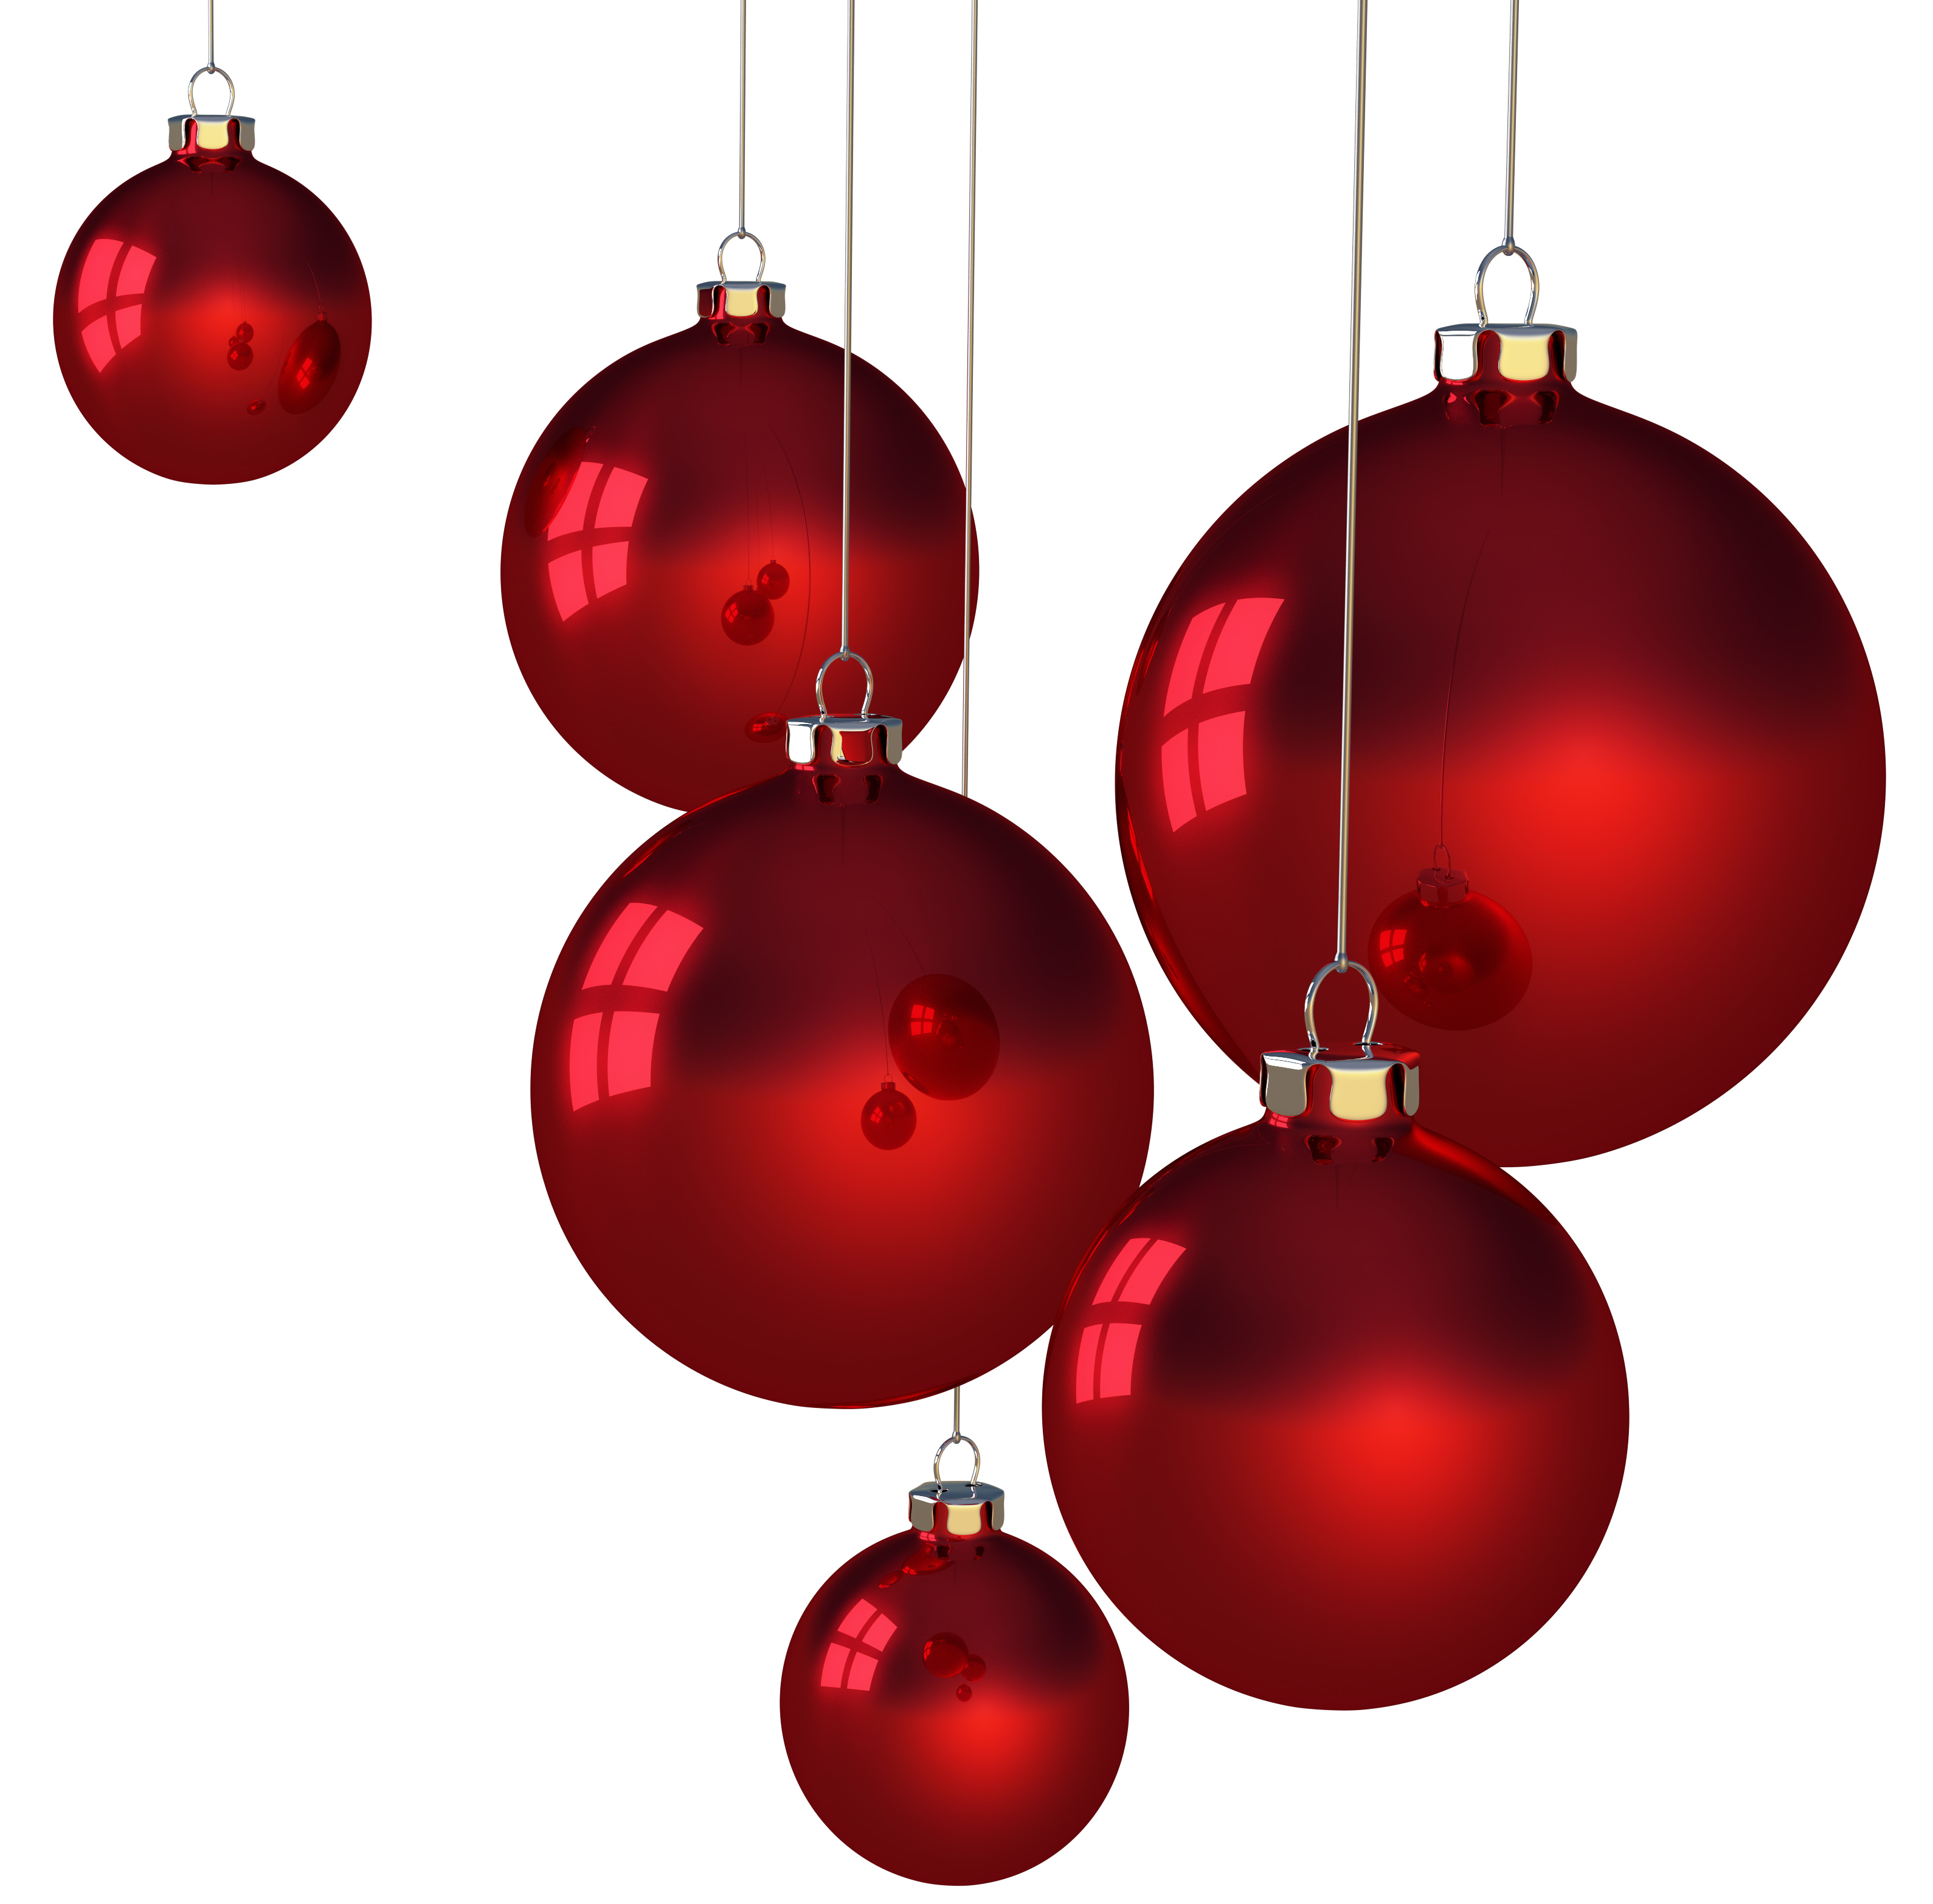 Christmas Baubles – Happy Holidays!